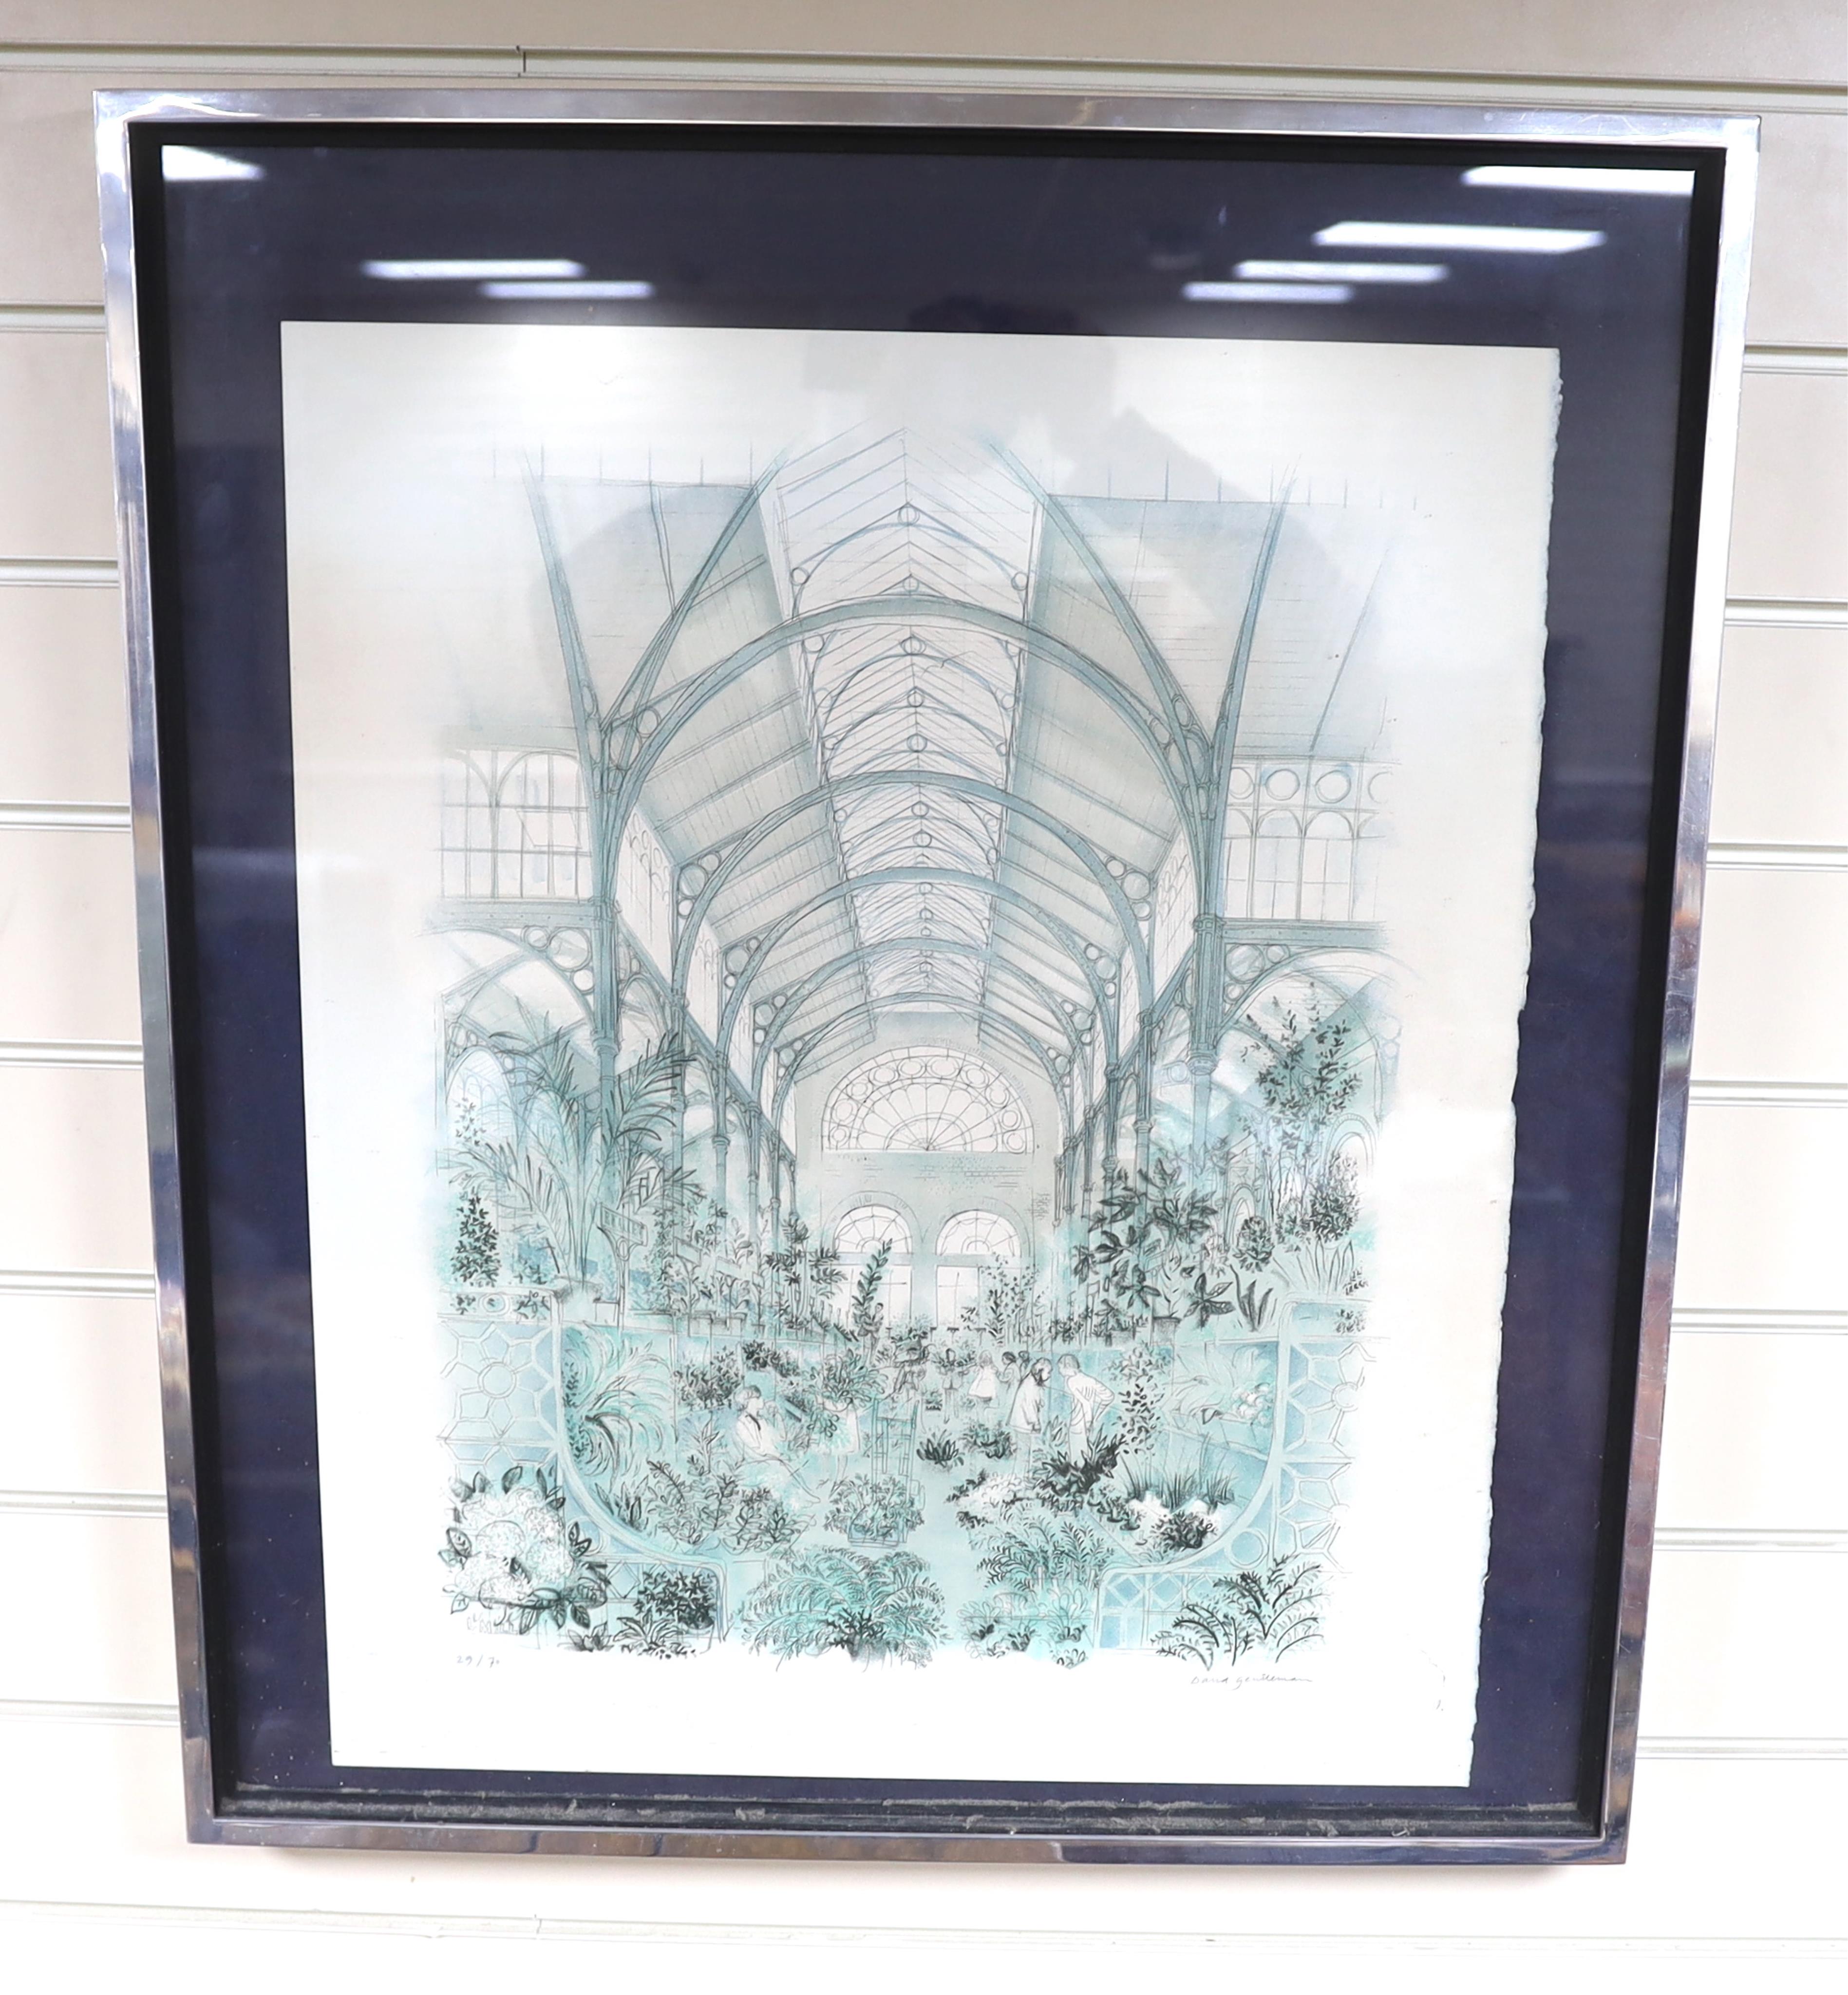 David Gentleman (b.1930), colour lithograph, ‘Covent Garden Flower Market’, signed in pencil, limited edition, 62 x 49cm